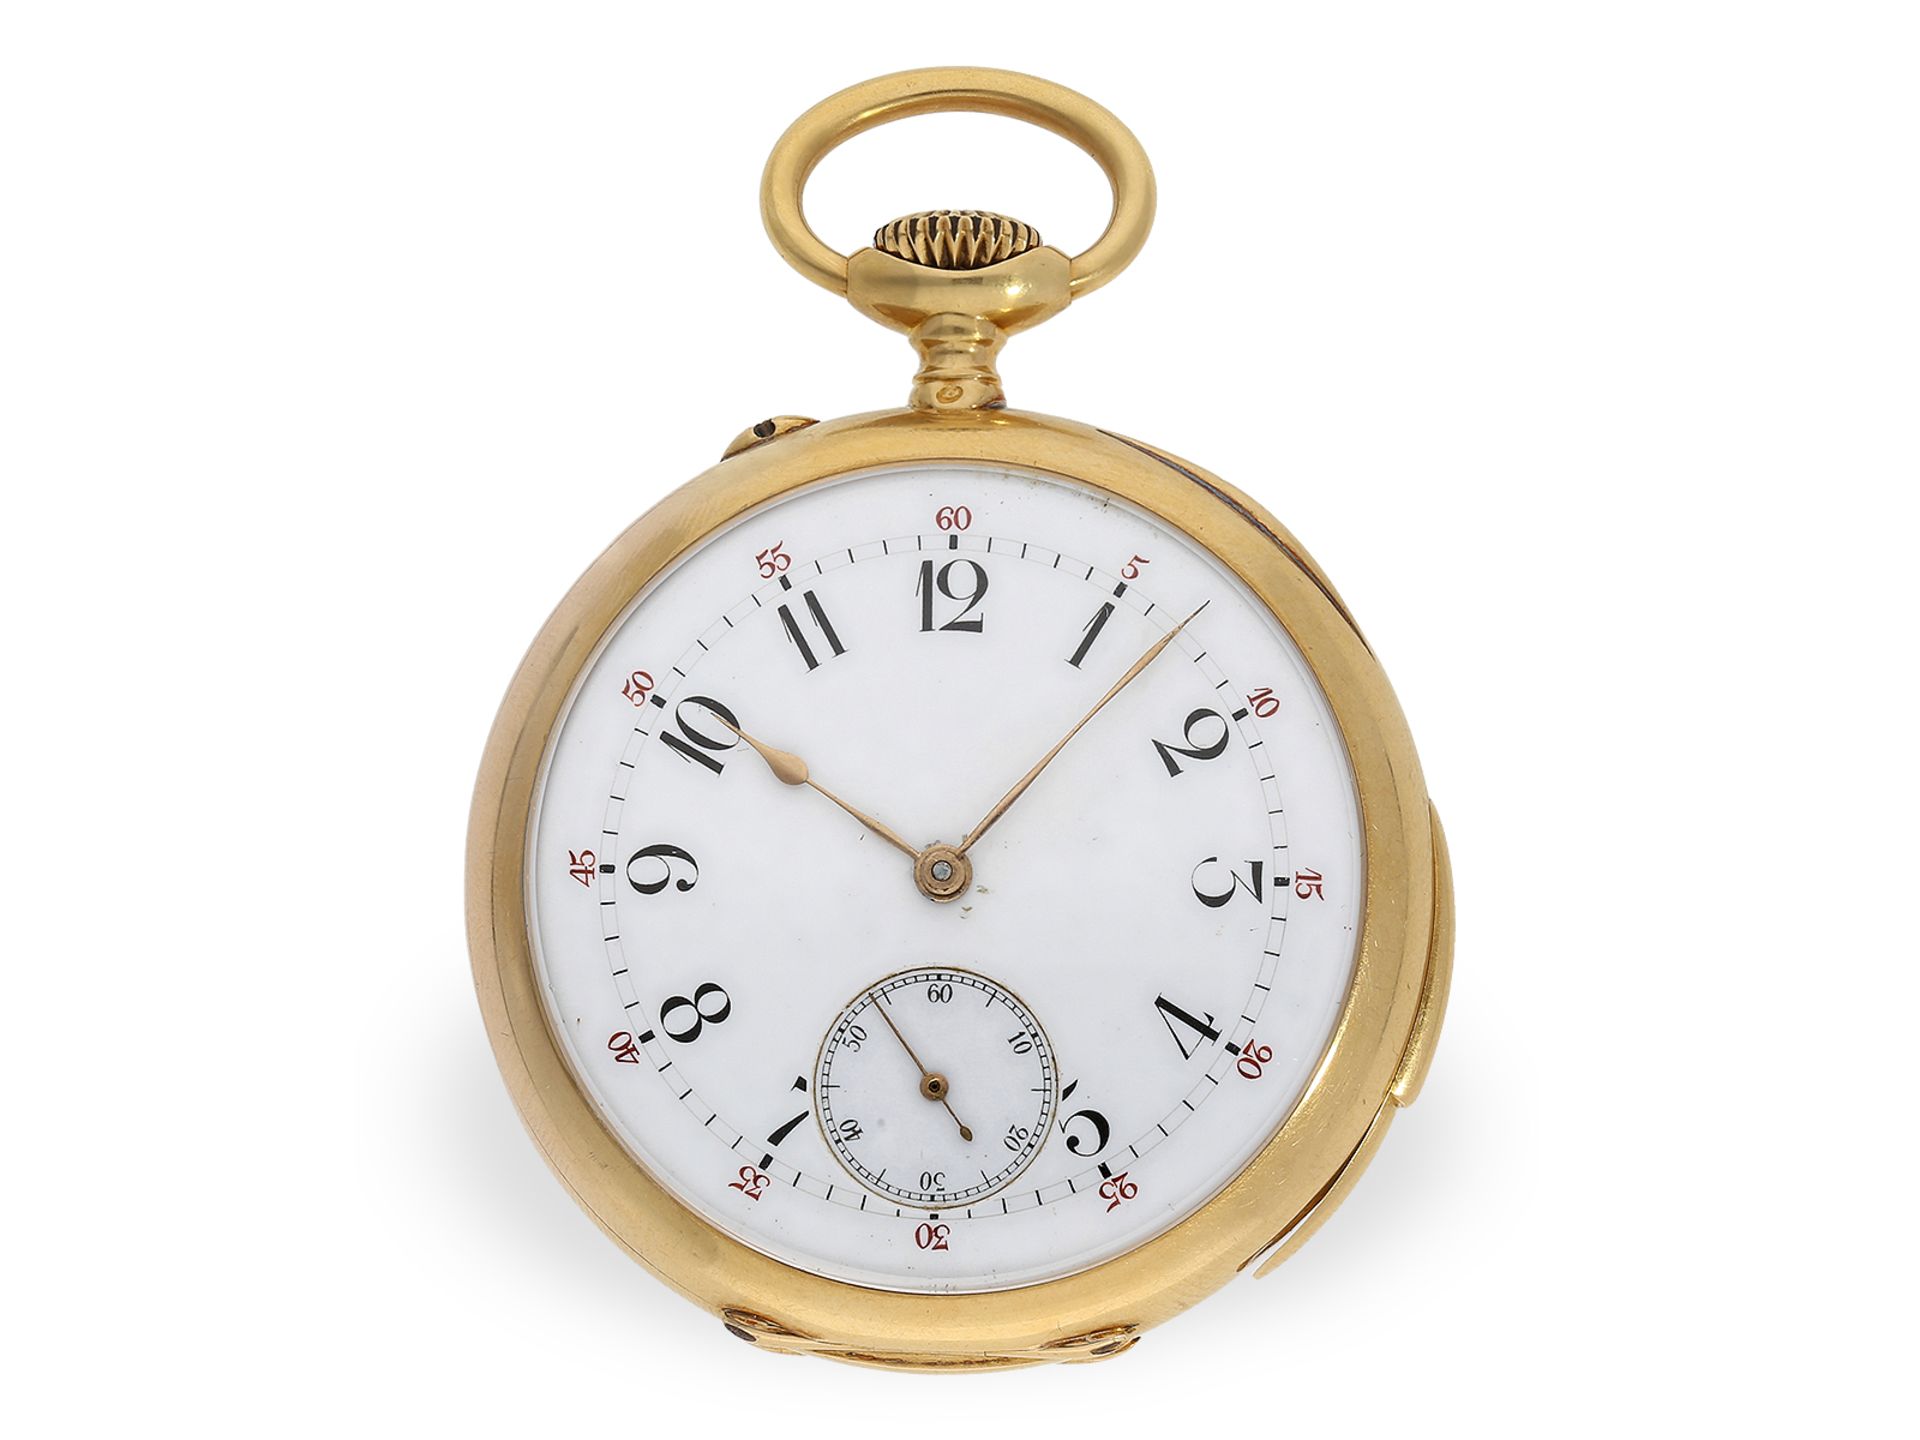 Fine 18K precision pocket watch with quarter repeater, probably Le Coultre, ca. 1900